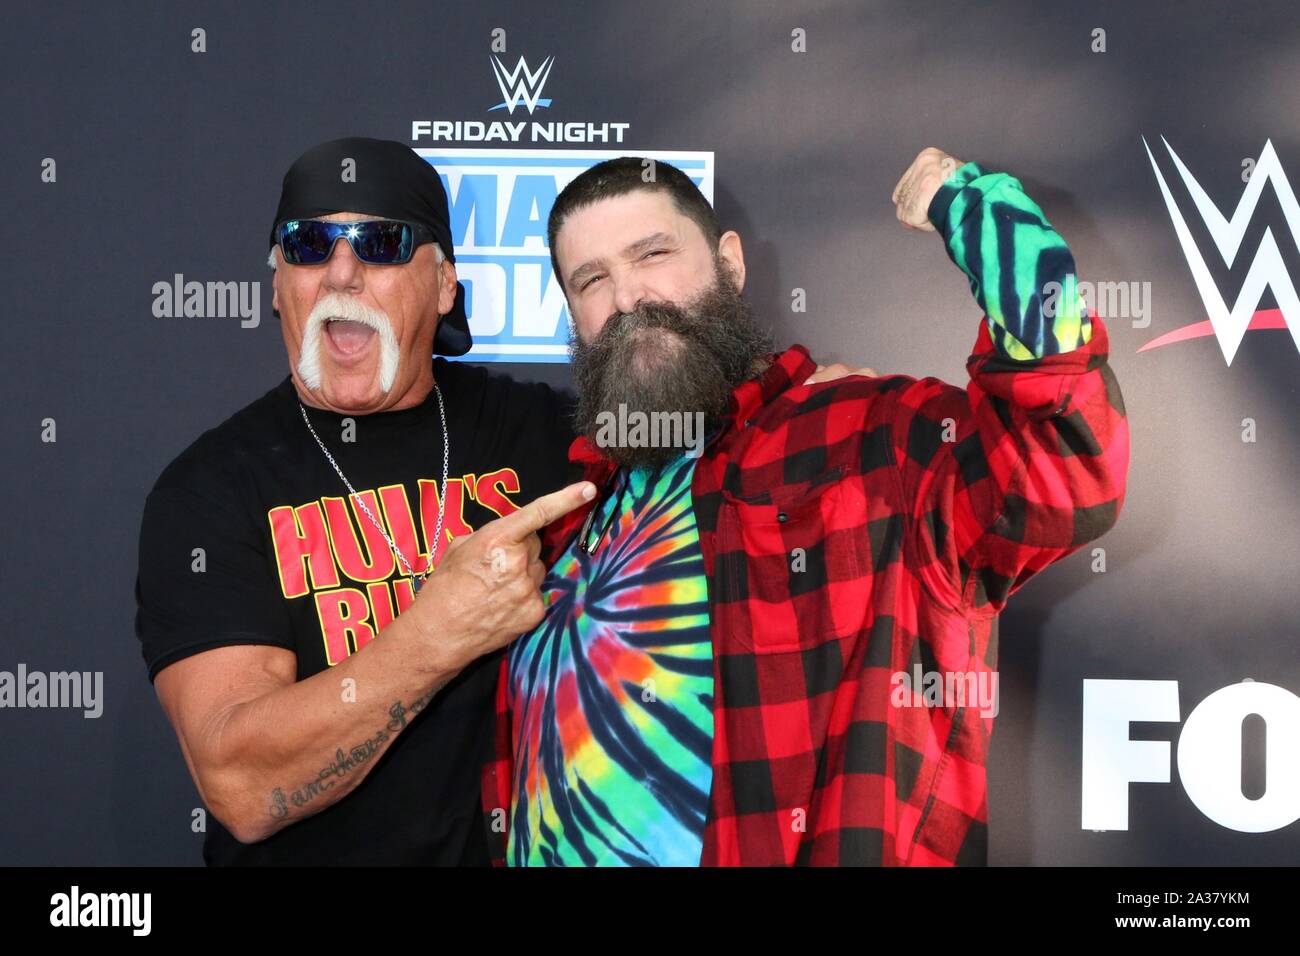 Los Angeles, CA. 4th Oct, 2019. Hulk Hogan, Mick Foley at arrivals for WWE 20th Anniversary Celebration SmackDown Premiere, STAPLES Center, Angeles, CA October 4, 2019. Credit: Priscilla Grant/Everett Collection/Alamy Live